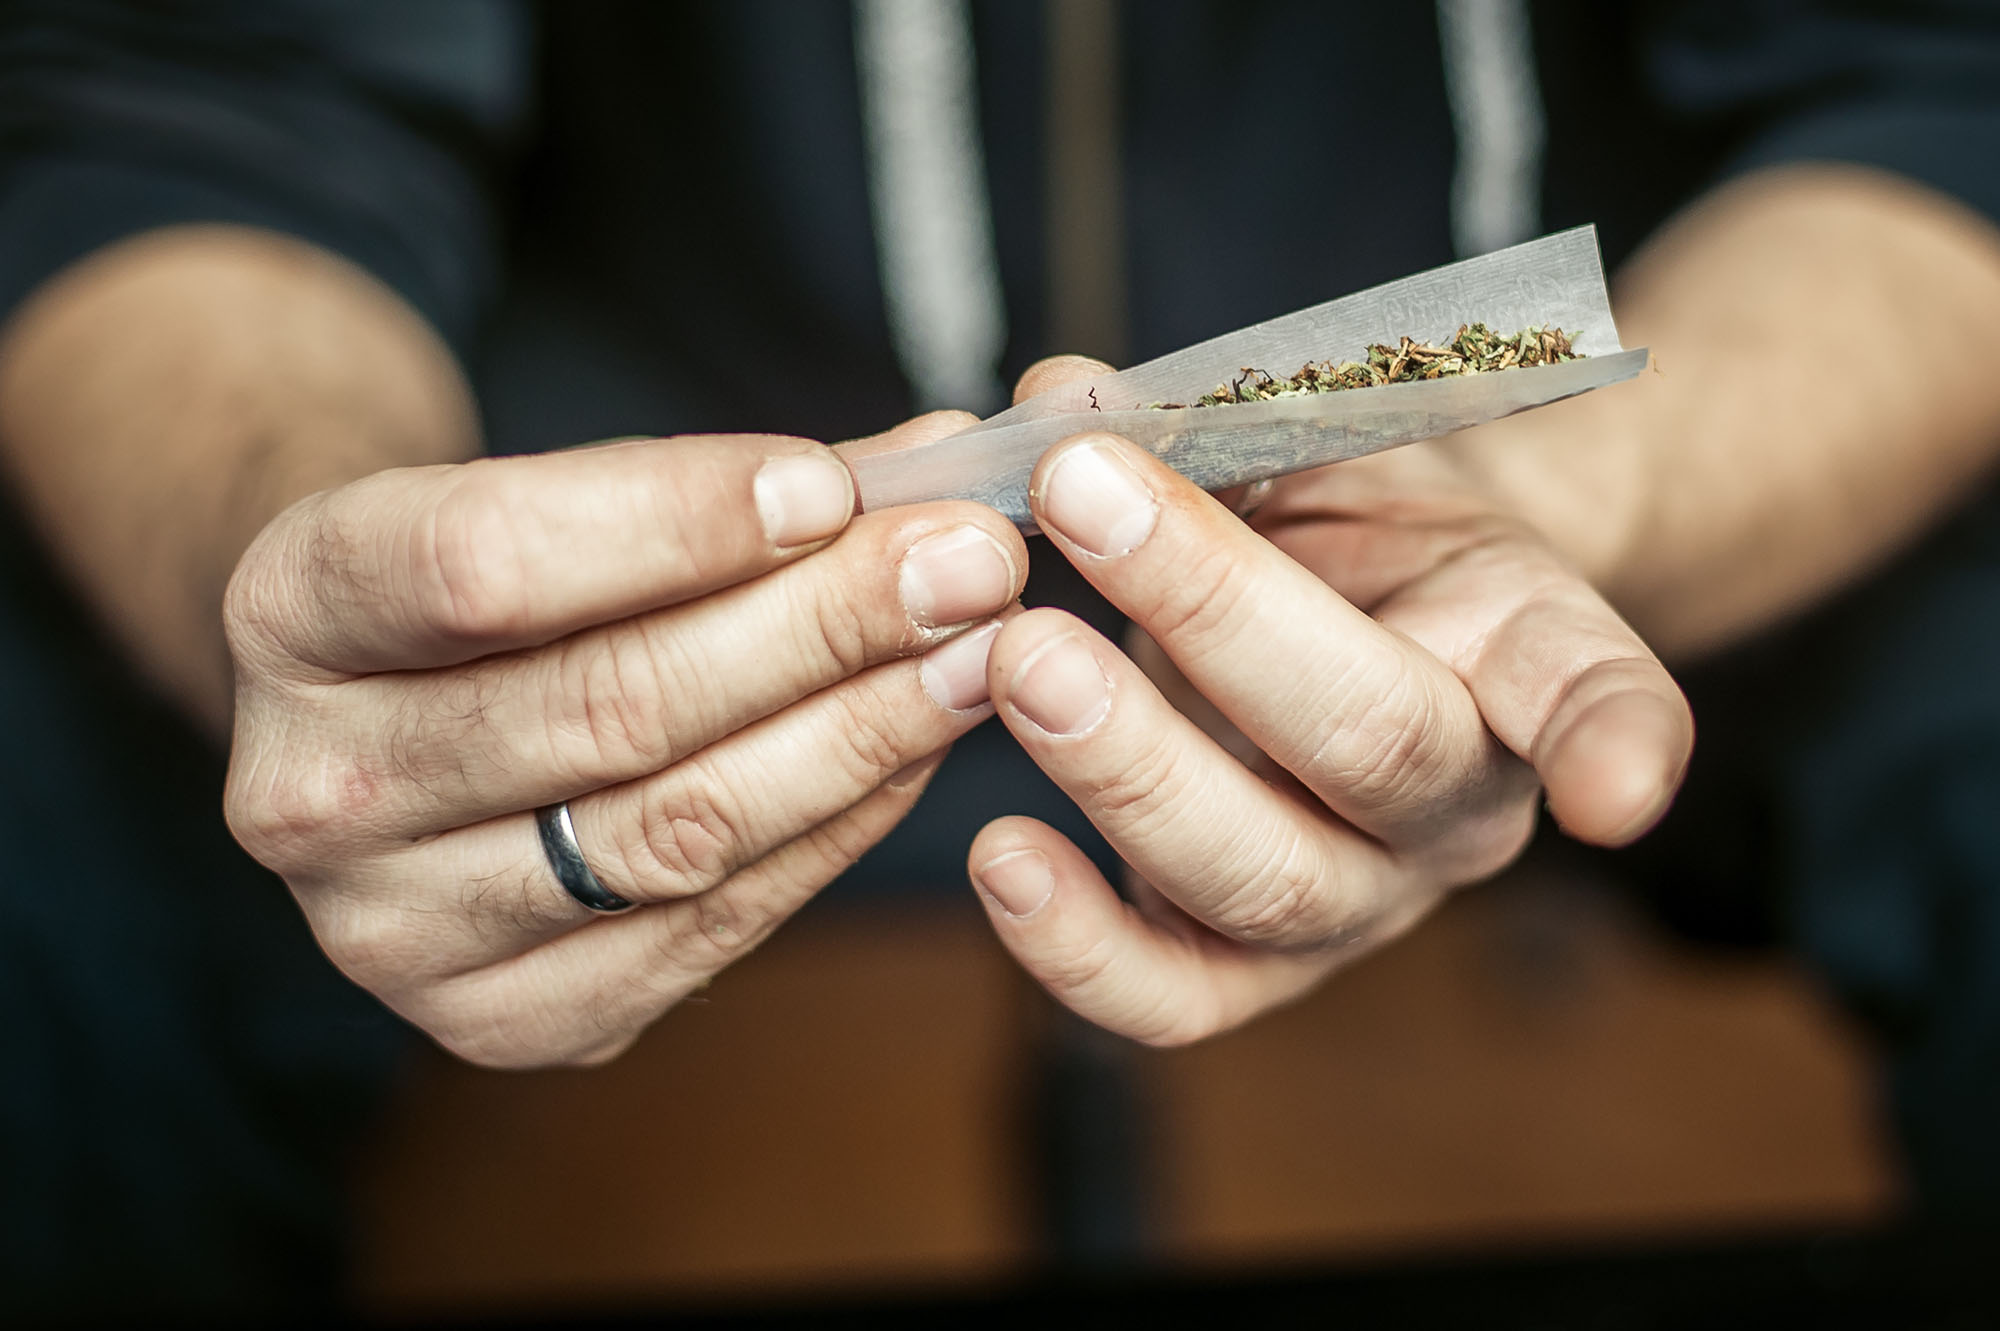 Preparing and rolling cannabis joint